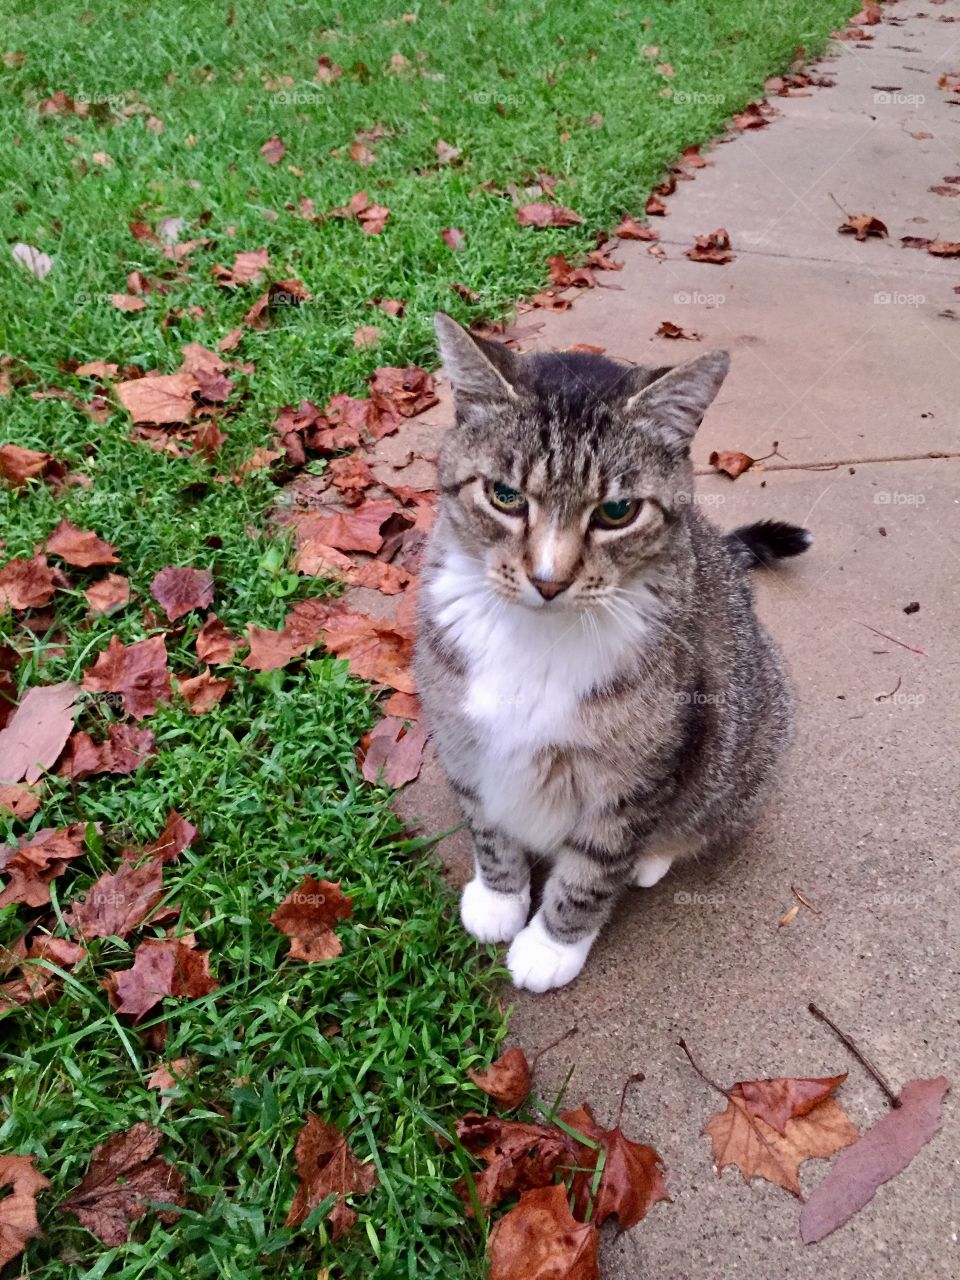 A grey tabby sits on the edge of a sidewalk next to late fallen leaves and bright green grass, looking at the camera